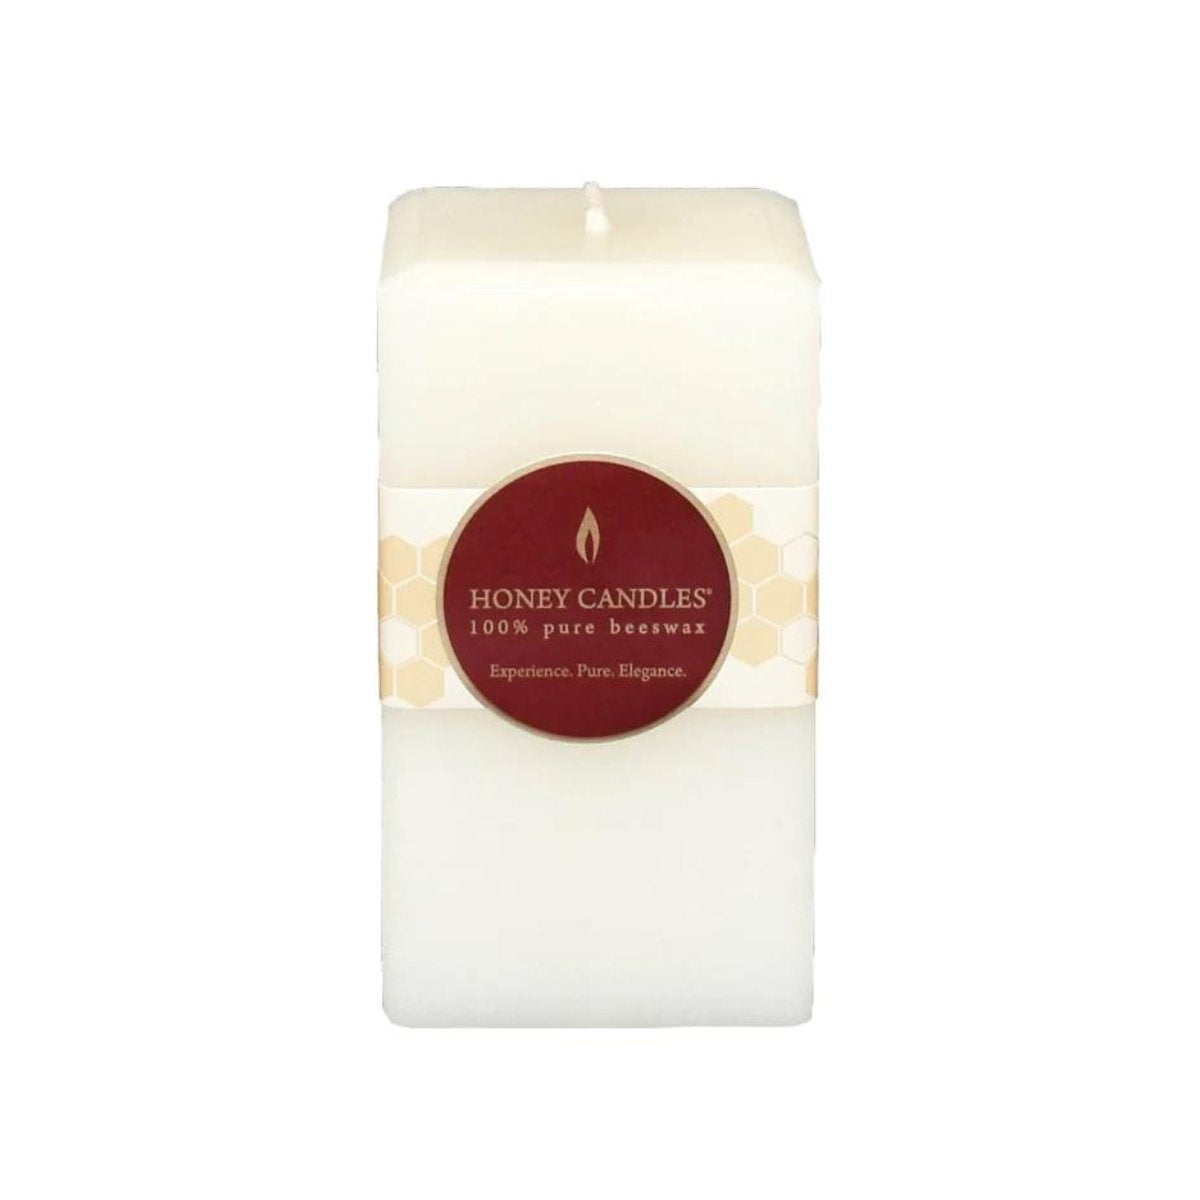 Honey Candles Beeswax Square Pillar Candle - 5 x 3 Pearl White